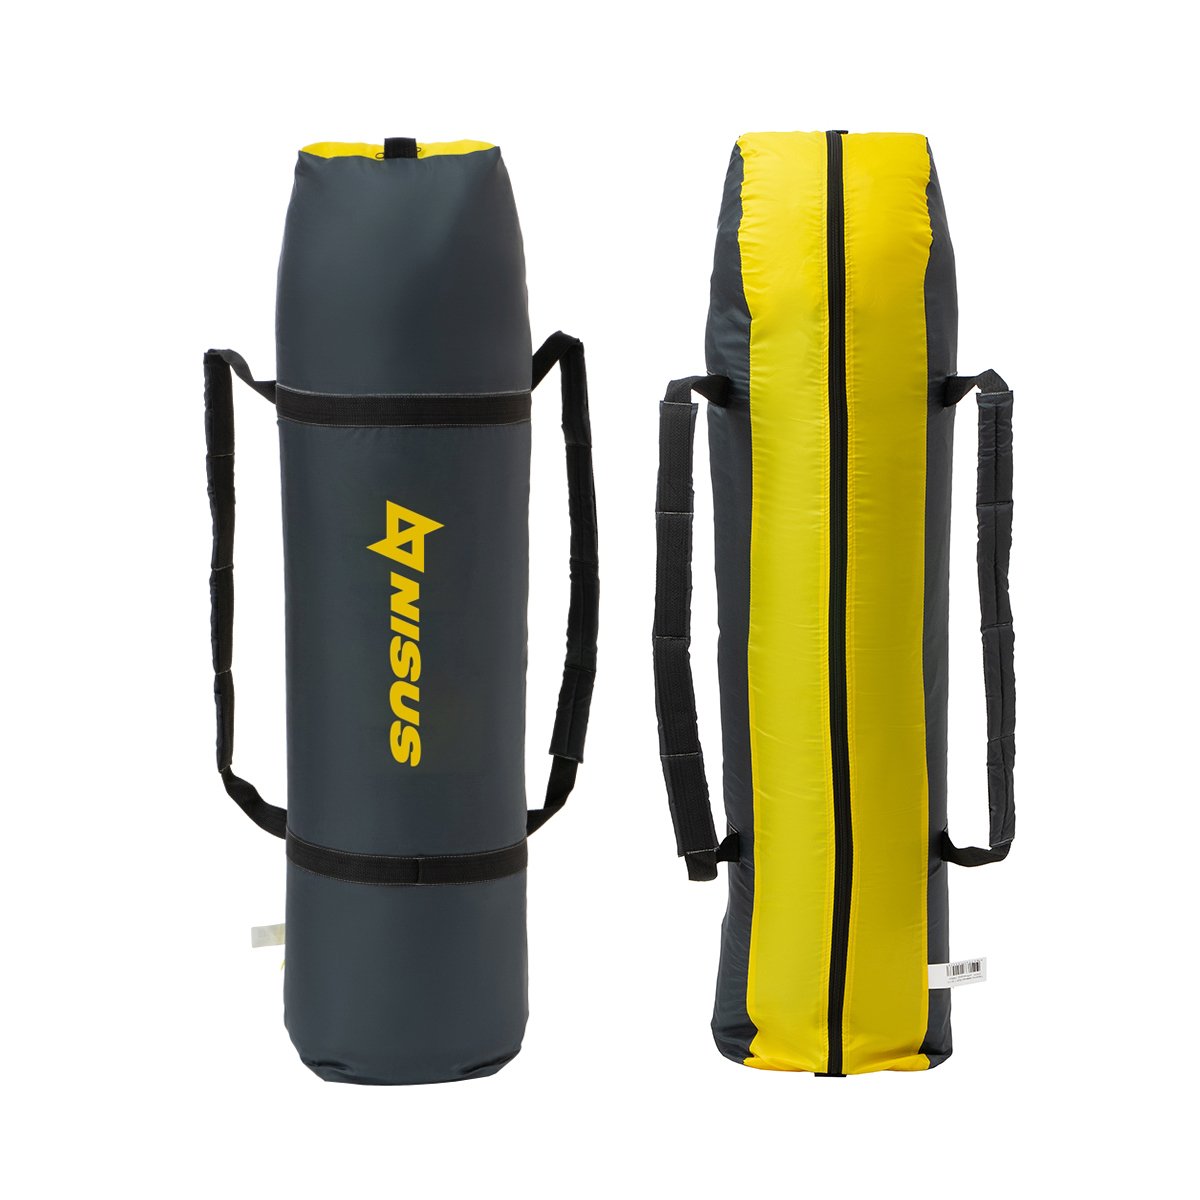 A carrying bag with straps for Cube Insulated Pop-Up Ice Fishing Shelter for 2 Persons, yellow and black